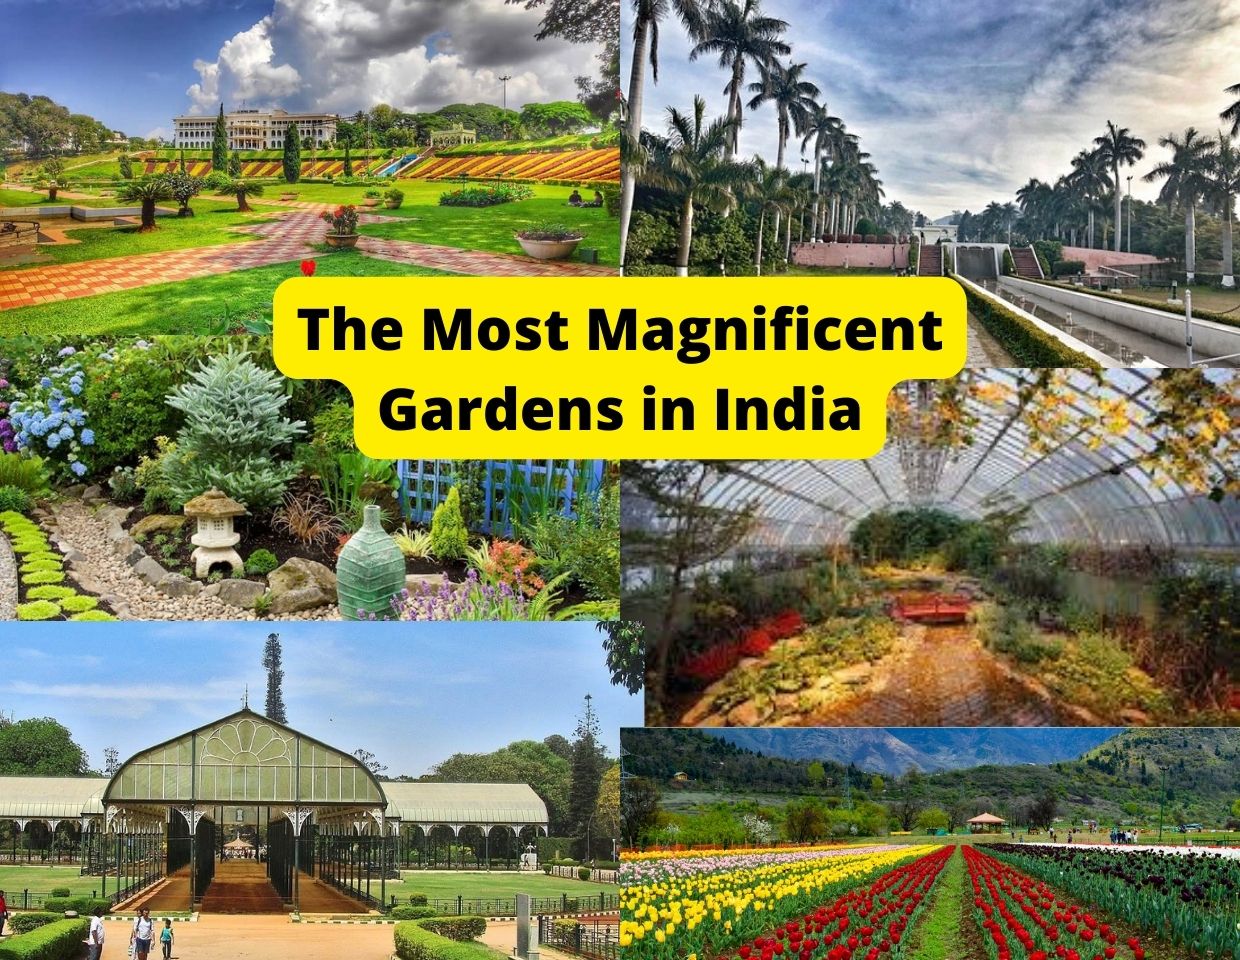 The Most Magnificent Gardens in India